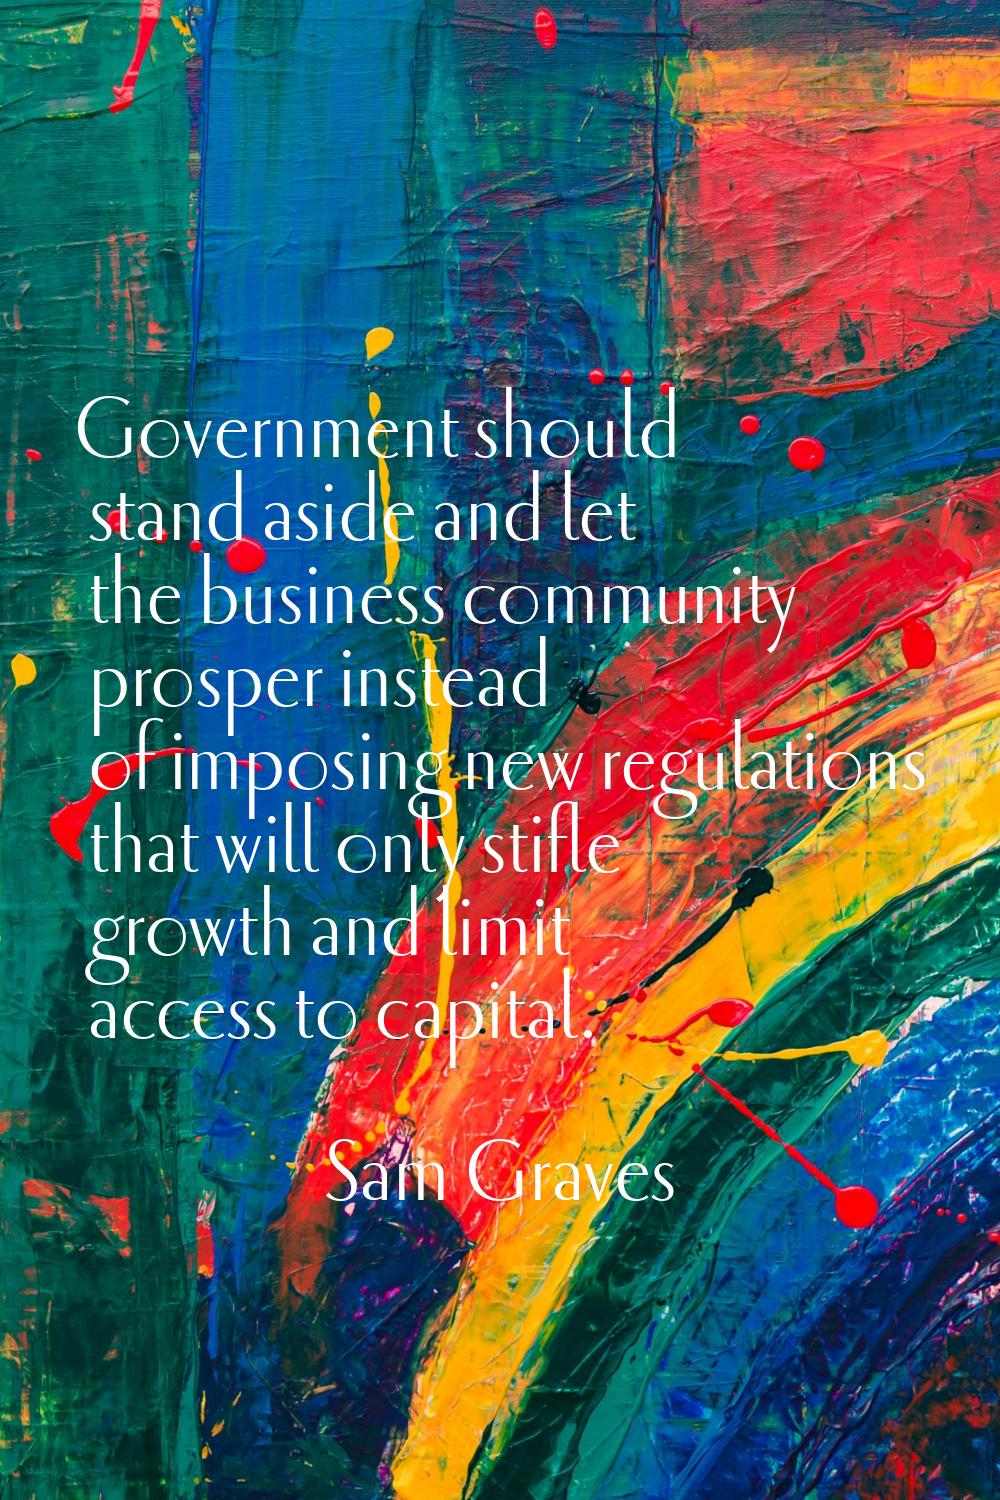 Government should stand aside and let the business community prosper instead of imposing new regula